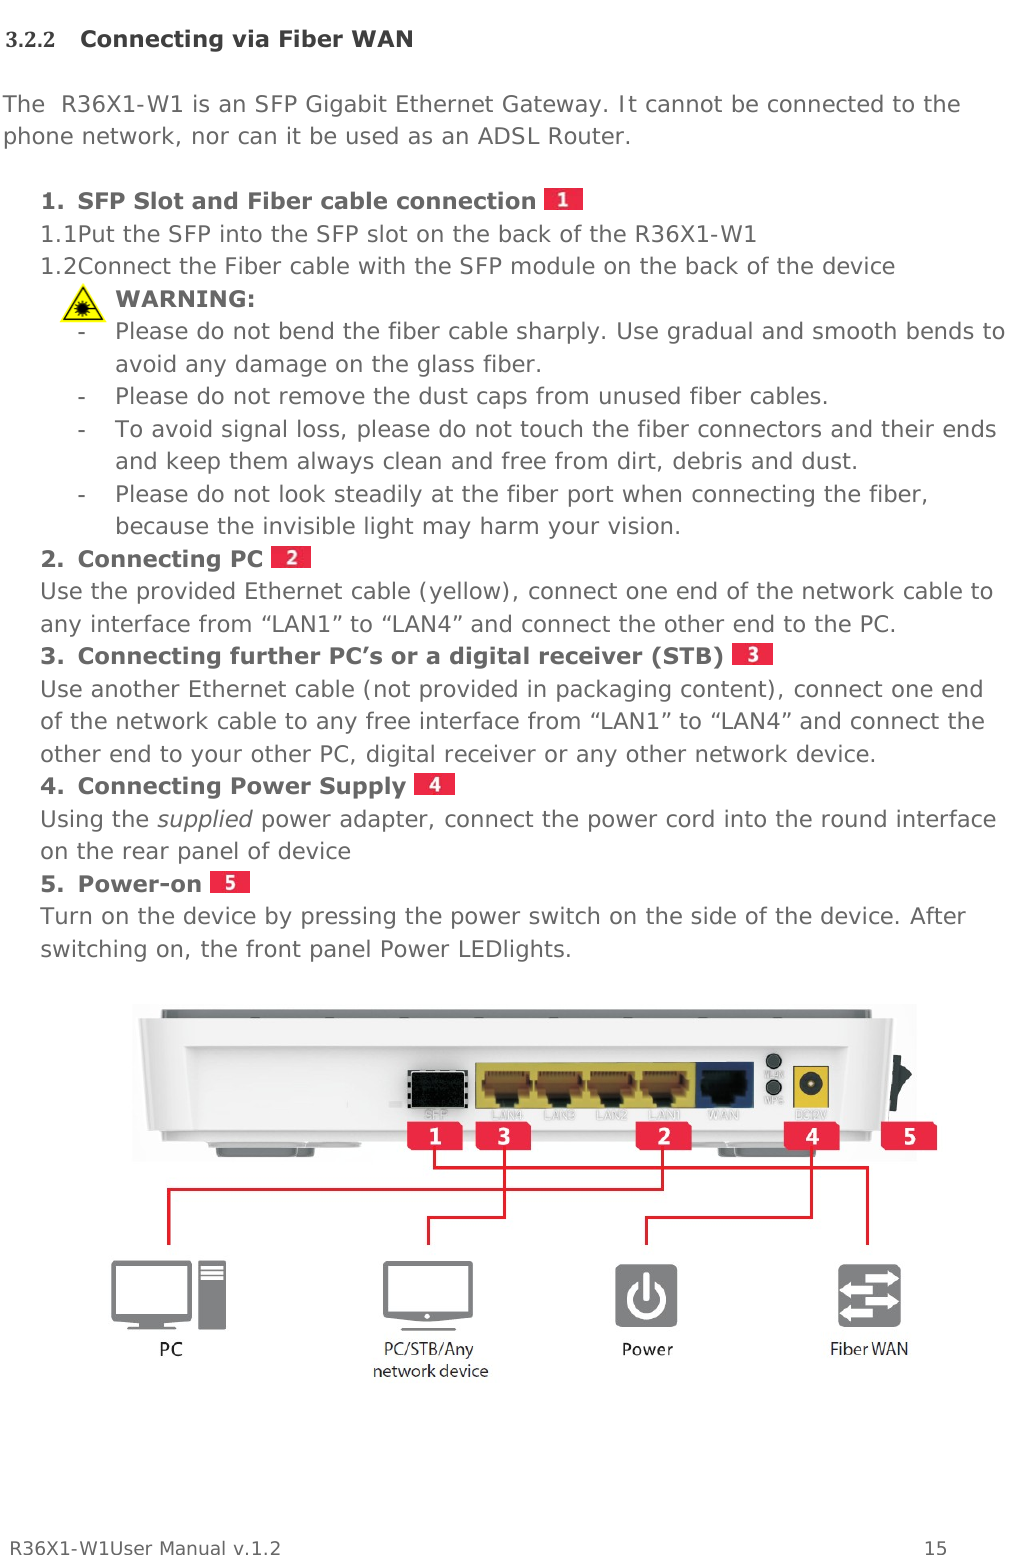           R36X1-W1User Manual v.1.2    15  3.2.2 Connecting via Fiber WANThe  R36X1-W1 is an SFP Gigabit Ethernet Gateway. It cannot be connected to the phone network, nor can it be used as an ADSL Router.  1. SFP Slot and Fiber cable connection   1.1Put the SFP into the SFP slot on the back of the R36X1-W1 1.2Connect the Fiber cable with the SFP module on the back of the device WARNING:   -  Please do not bend the fiber cable sharply. Use gradual and smooth bends to avoid any damage on the glass fiber.  -  Please do not remove the dust caps from unused fiber cables. -  To avoid signal loss, please do not touch the fiber connectors and their ends and keep them always clean and free from dirt, debris and dust.  -  Please do not look steadily at the fiber port when connecting the fiber, because the invisible light may harm your vision. 2. Connecting PC   Use the provided Ethernet cable (yellow), connect one end of the network cable to any interface from “LAN1” to “LAN4” and connect the other end to the PC. 3. Connecting further PC’s or a digital receiver (STB)   Use another Ethernet cable (not provided in packaging content), connect one end of the network cable to any free interface from “LAN1” to “LAN4” and connect the other end to your other PC, digital receiver or any other network device. 4. Connecting Power Supply   Using the supplied power adapter, connect the power cord into the round interface on the rear panel of device 5. Power-on   Turn on the device by pressing the power switch on the side of the device. After switching on, the front panel Power LEDlights.    